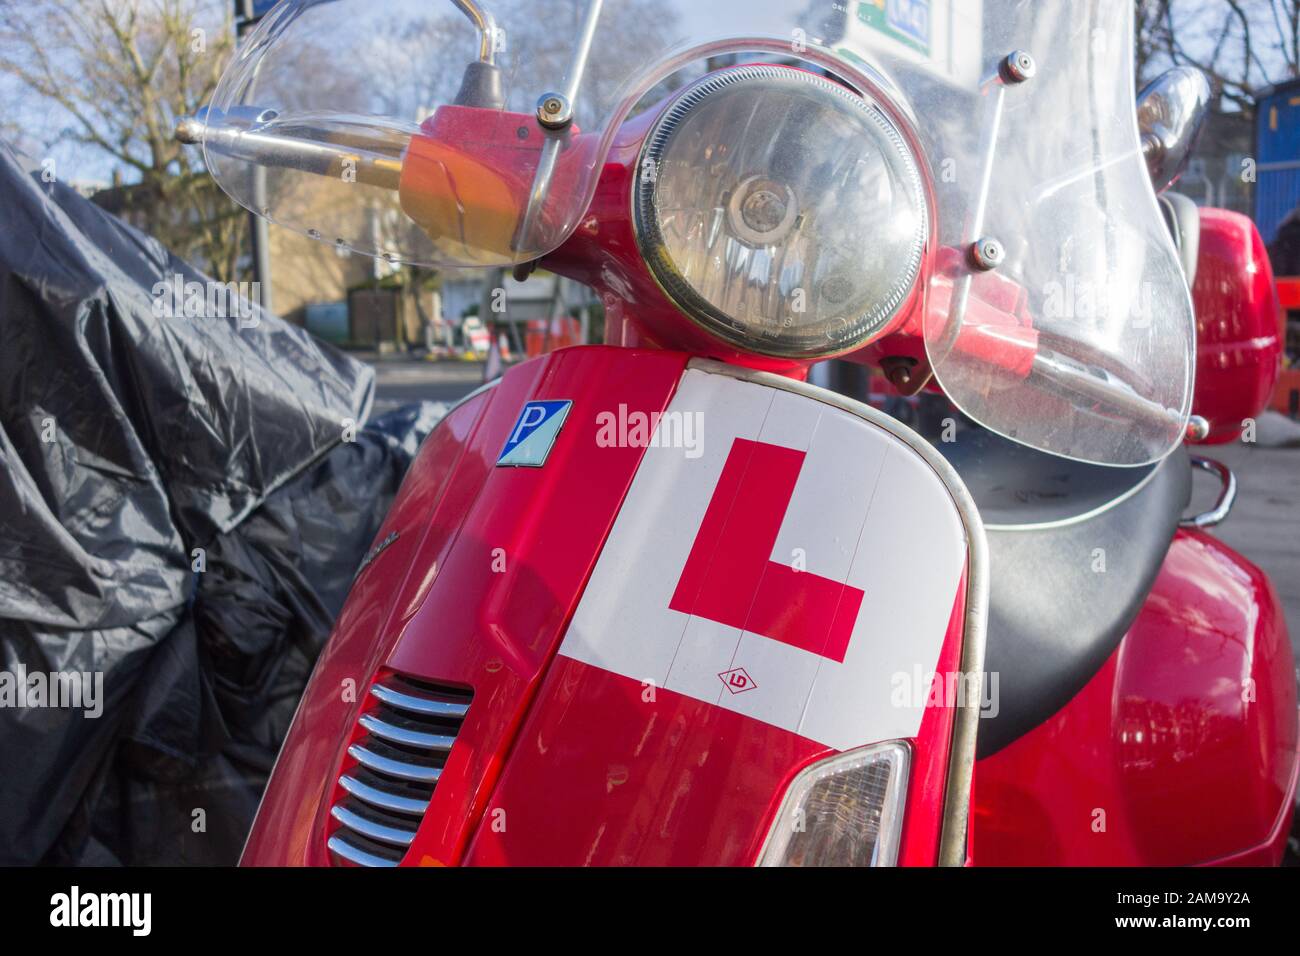 Close-up of a L-plate on a red Vespa Piaggio scooter Stock Photo